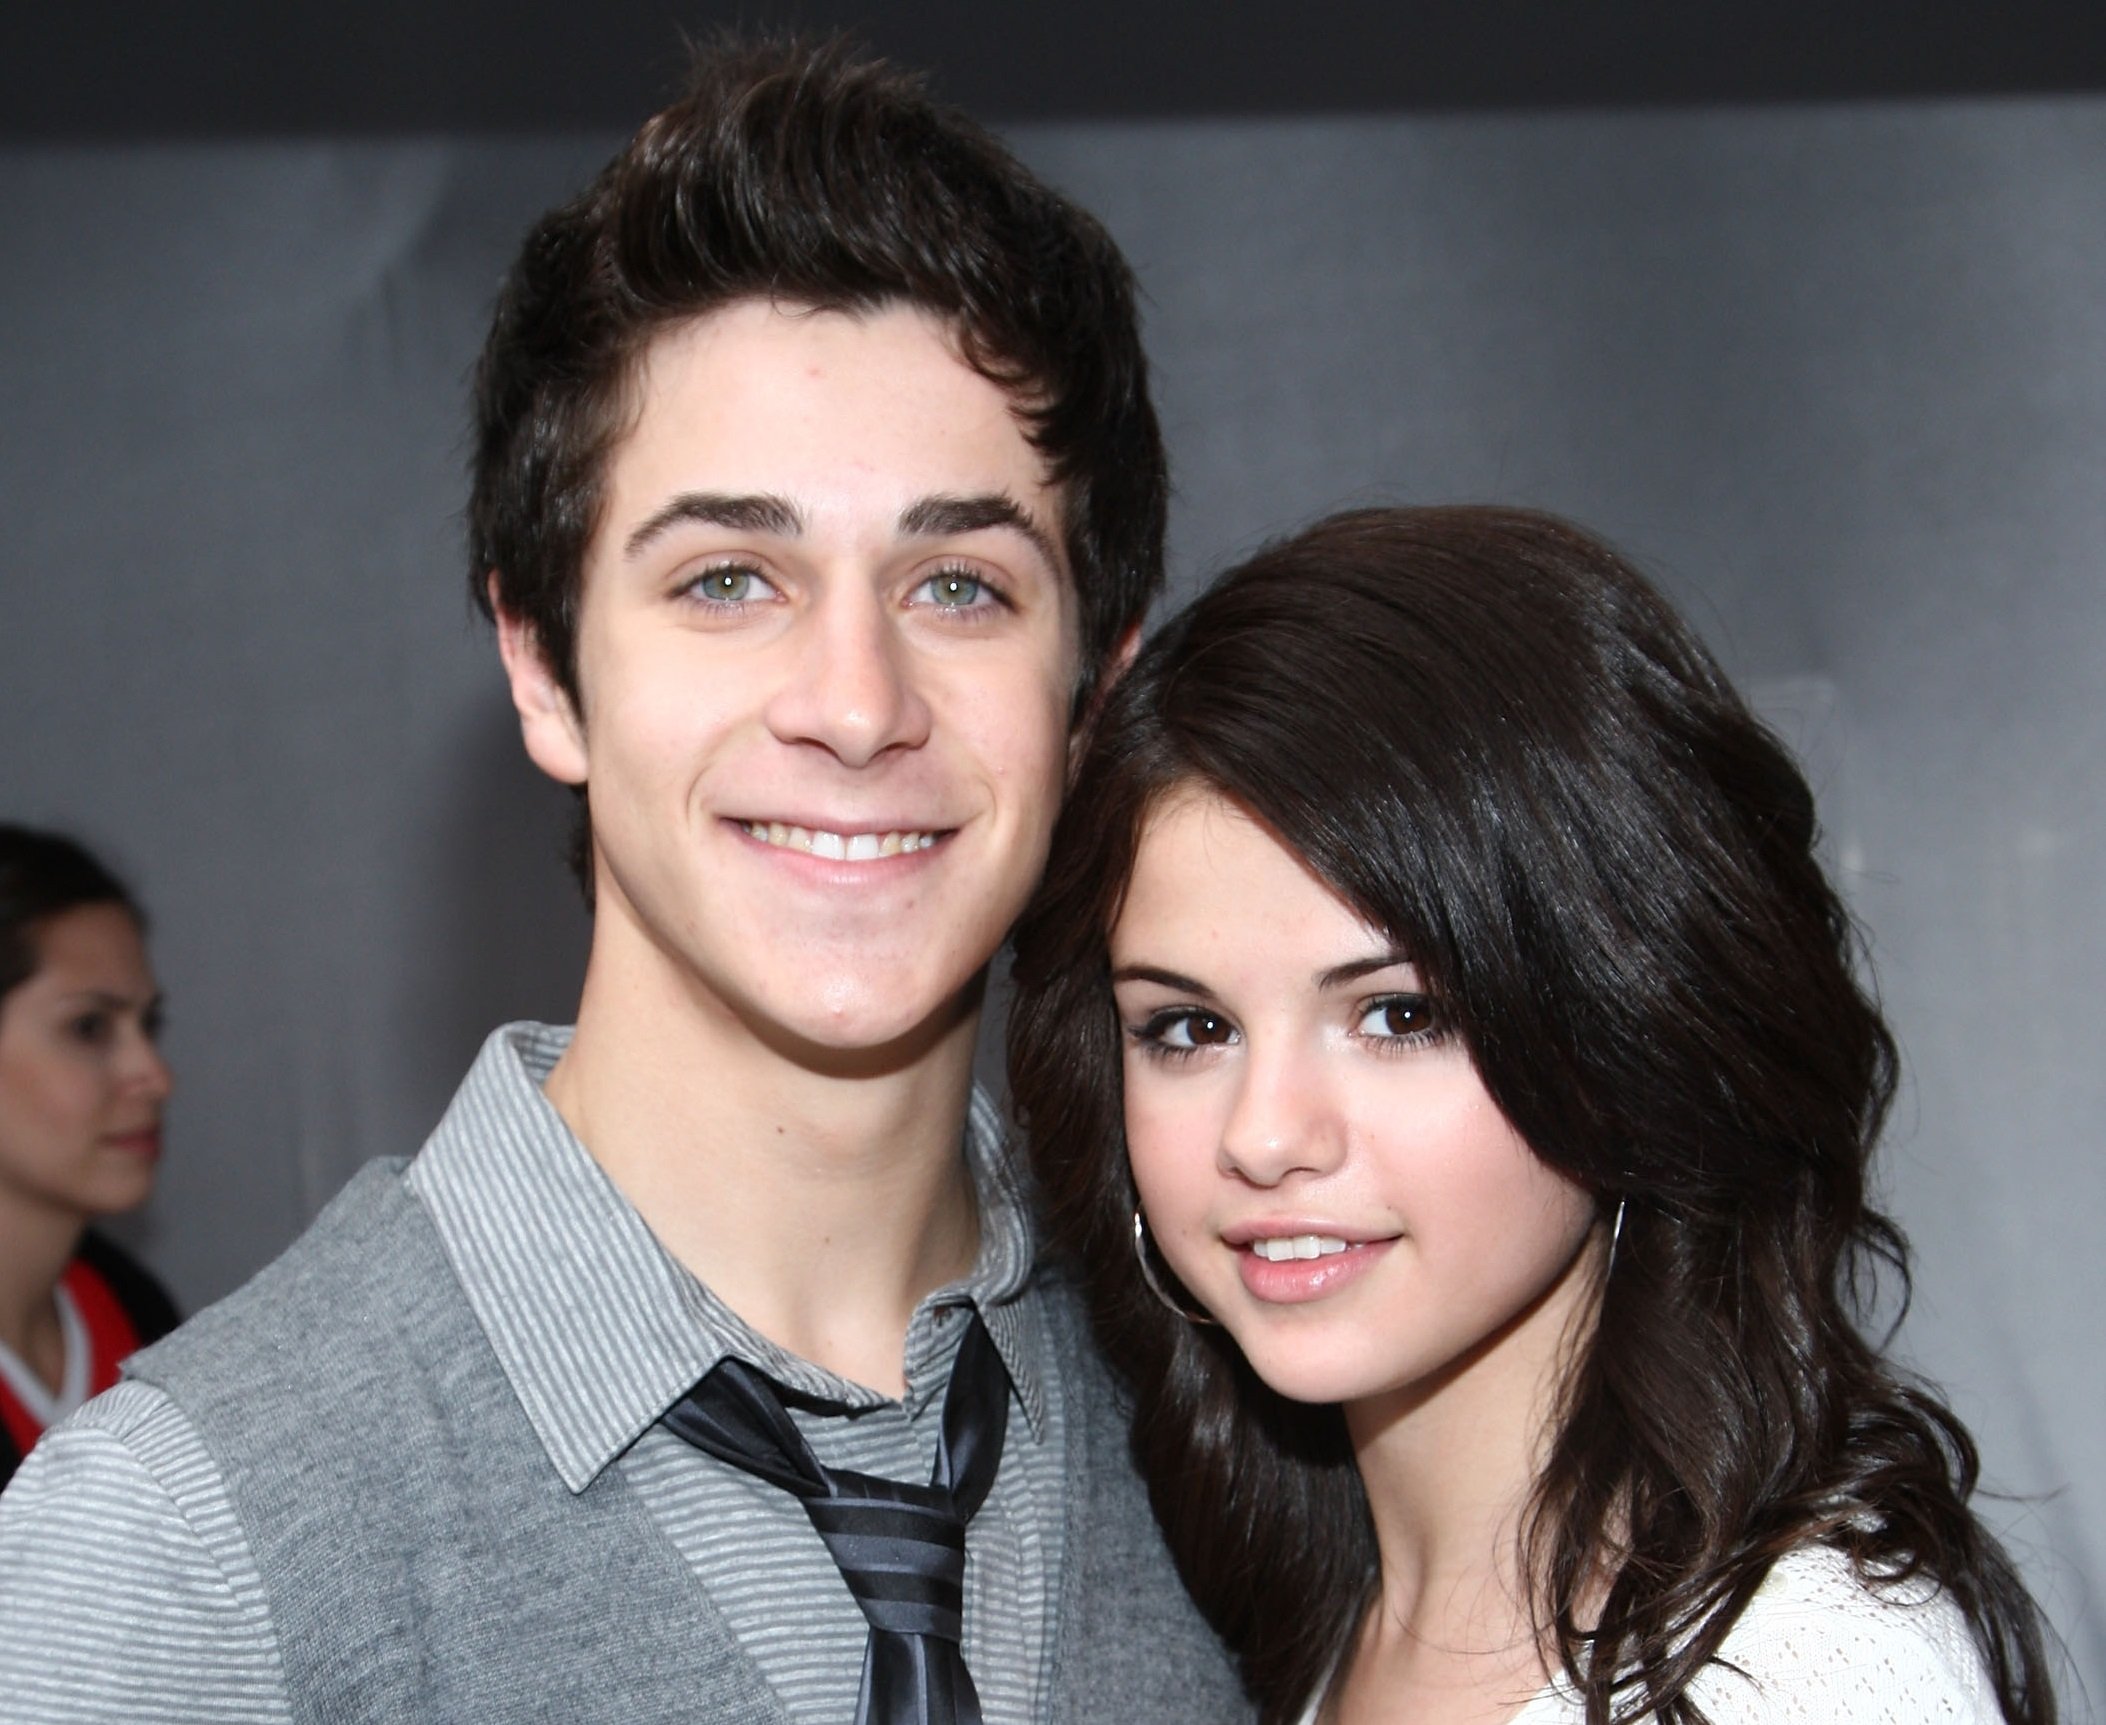 David Henrie and Selena Gomez attend Variety's Power of Youth event on October 4, 2008 in Los Angeles, California.